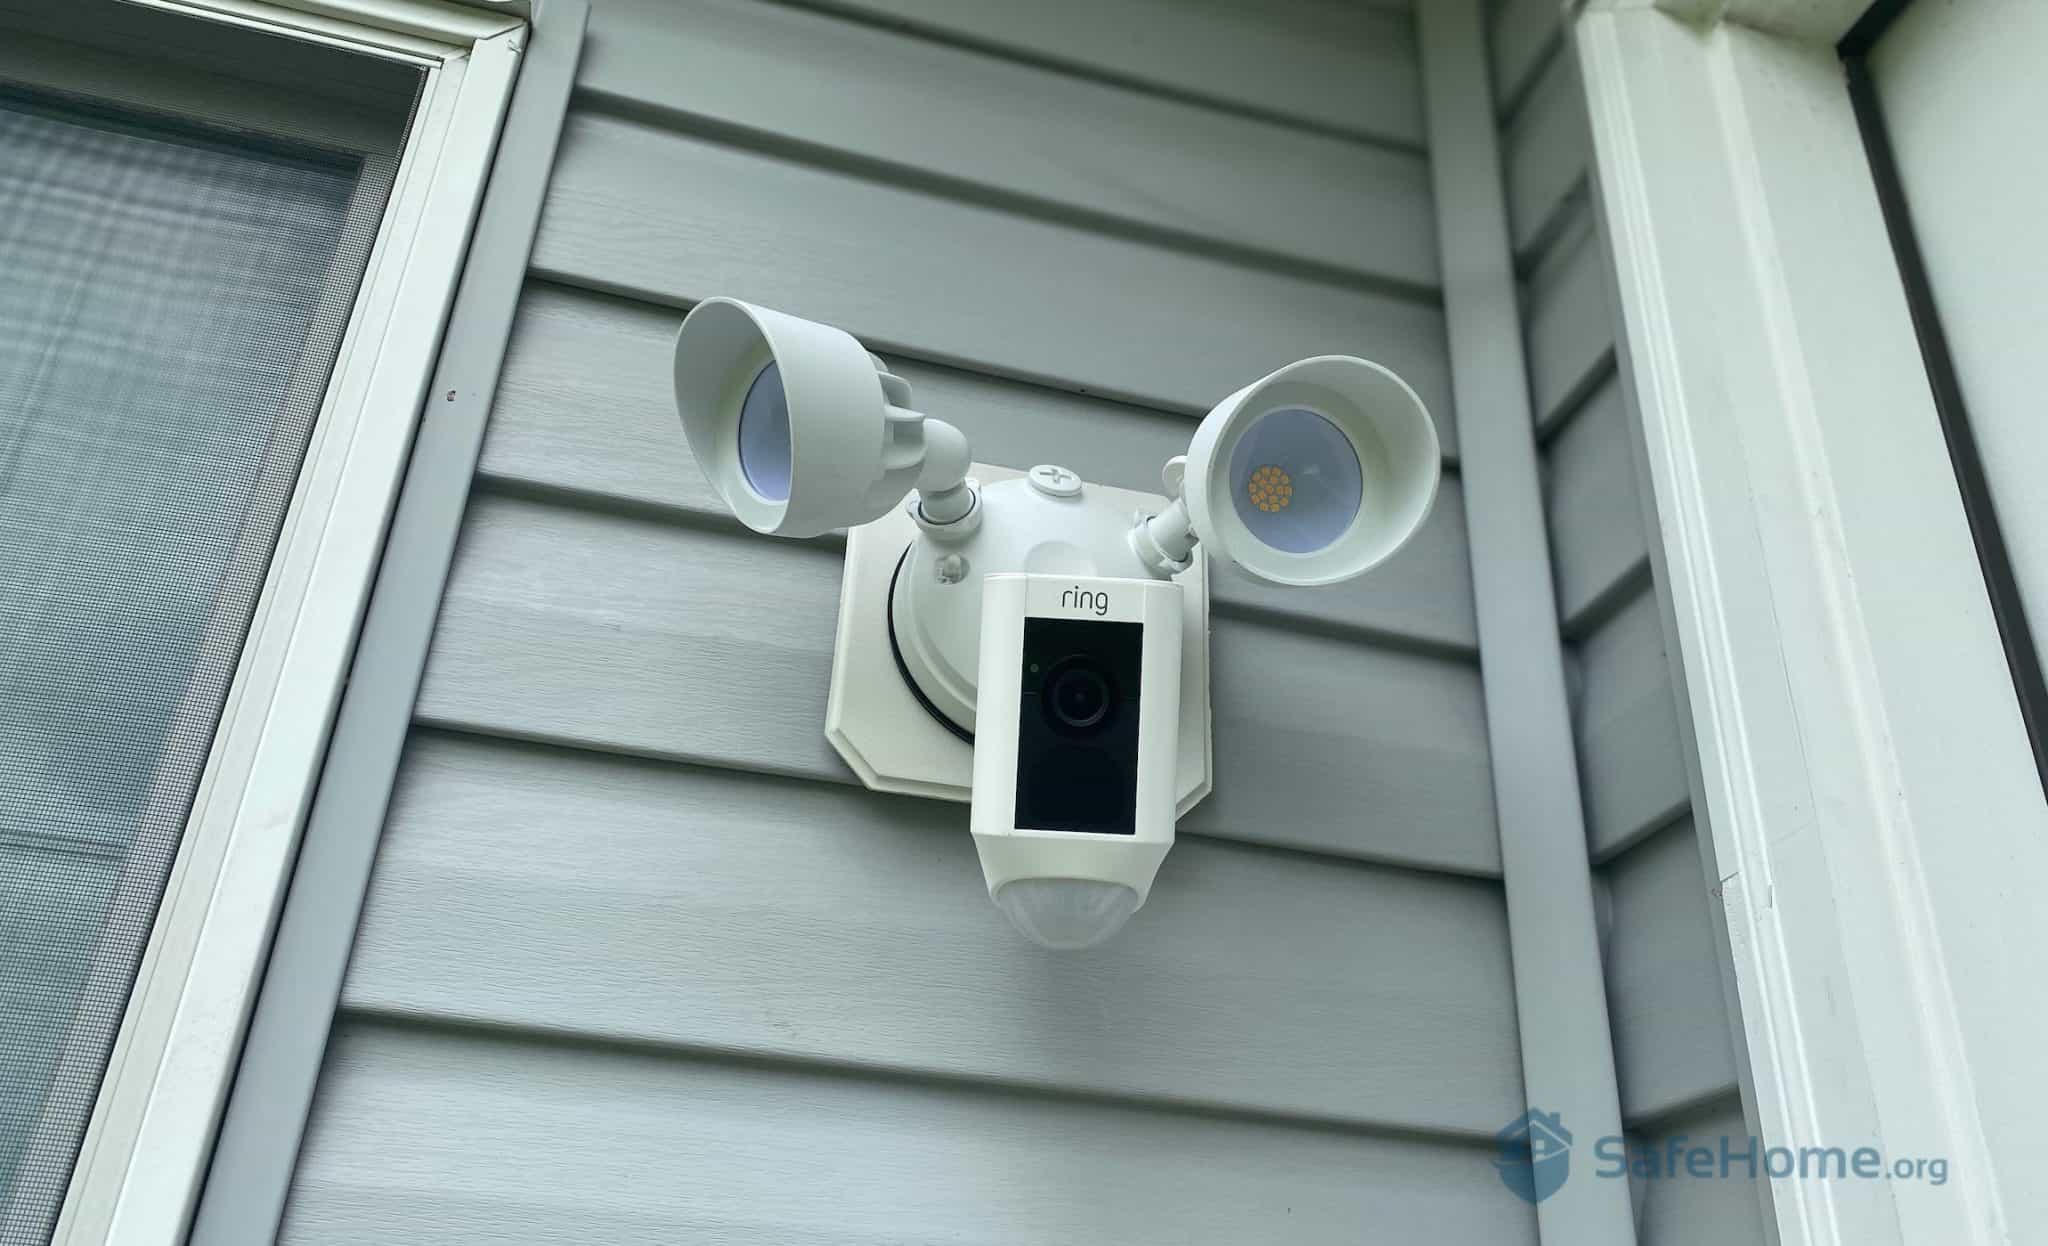 Ring Home Security Camera Cost and Pricing Plans in 2023